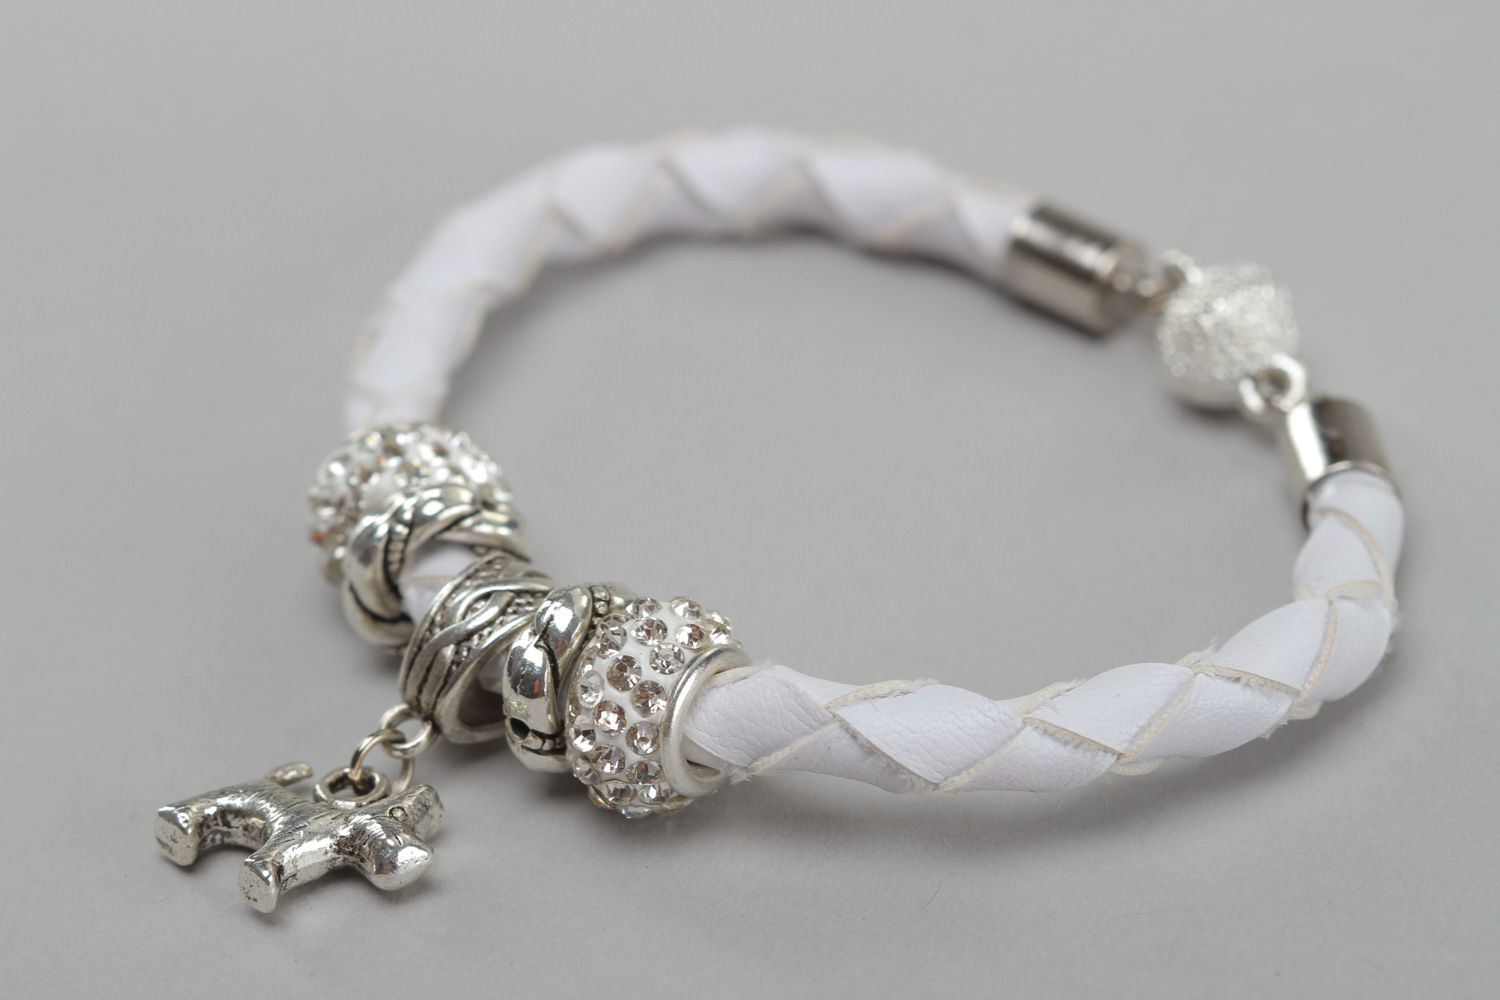 Handmade wrist bracelet woven of white faux leather with metal dog charm photo 2